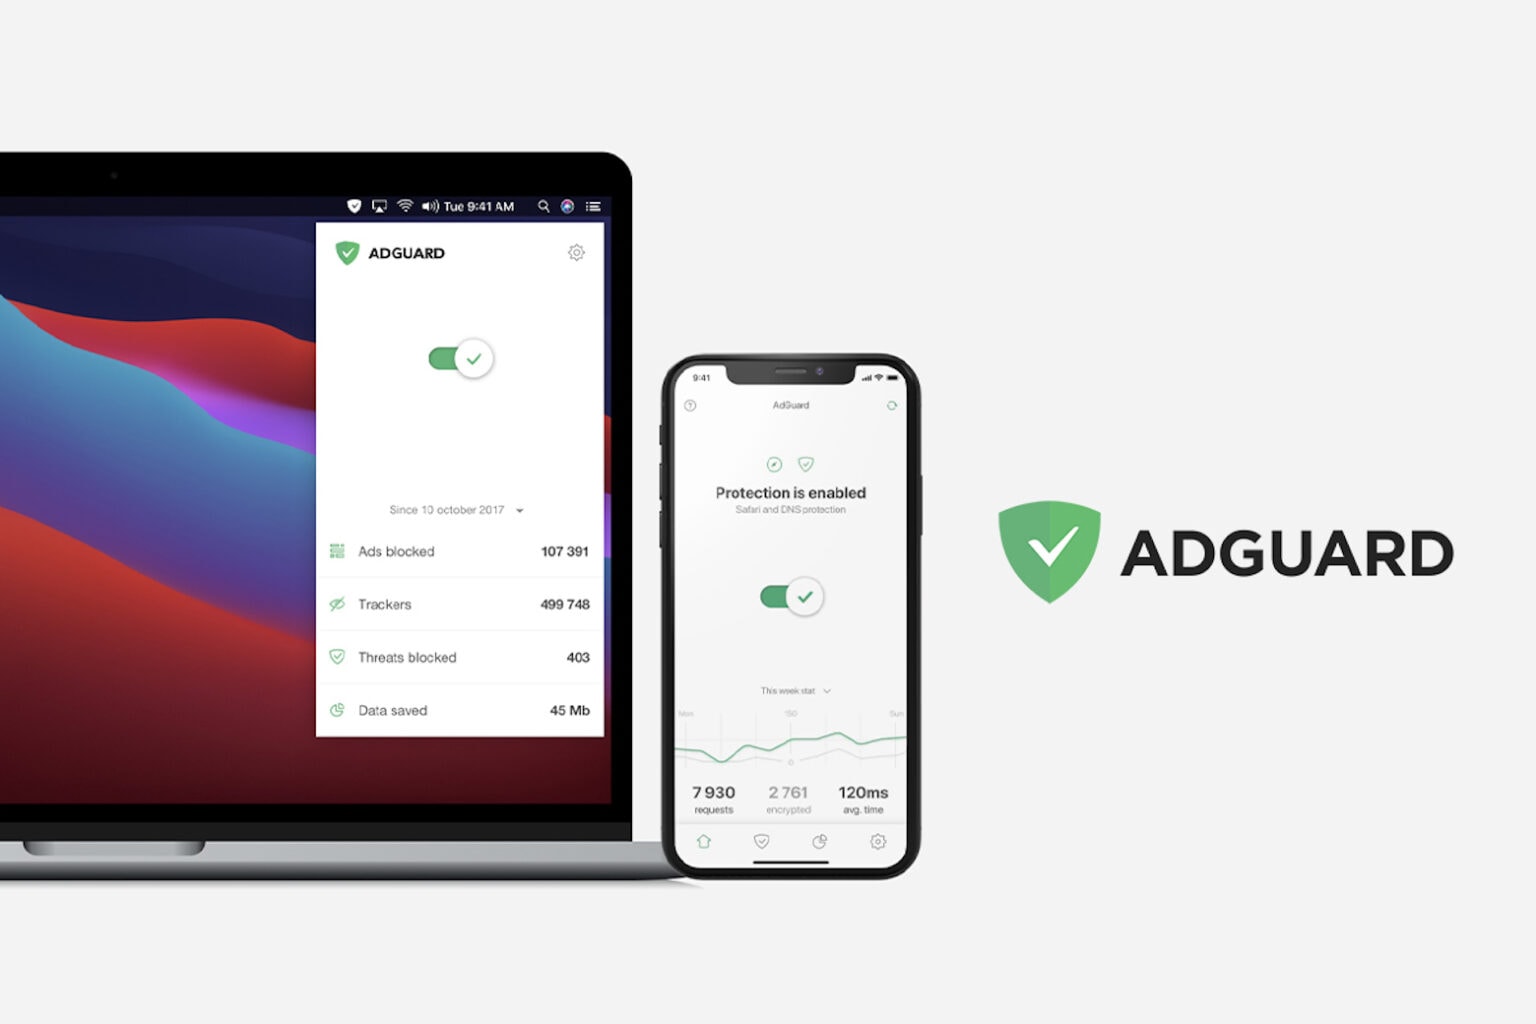 AdGuard can keep you and your family safe online, now only $26.49.